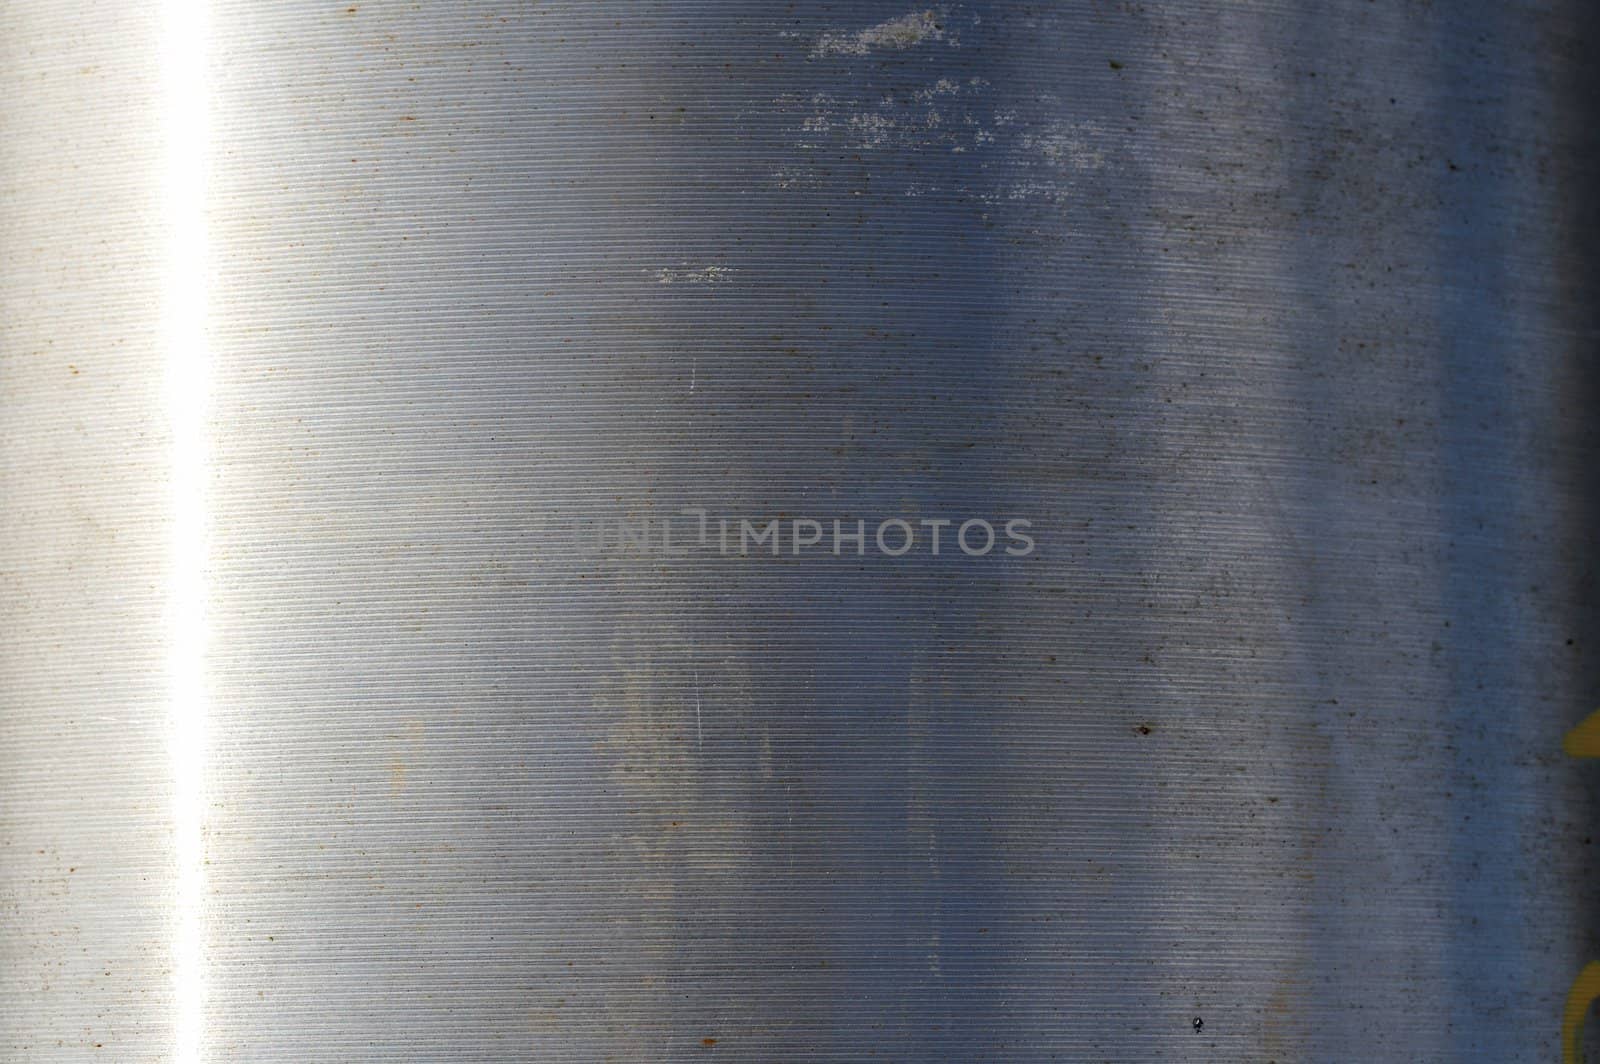 a close up picture of metal pipe